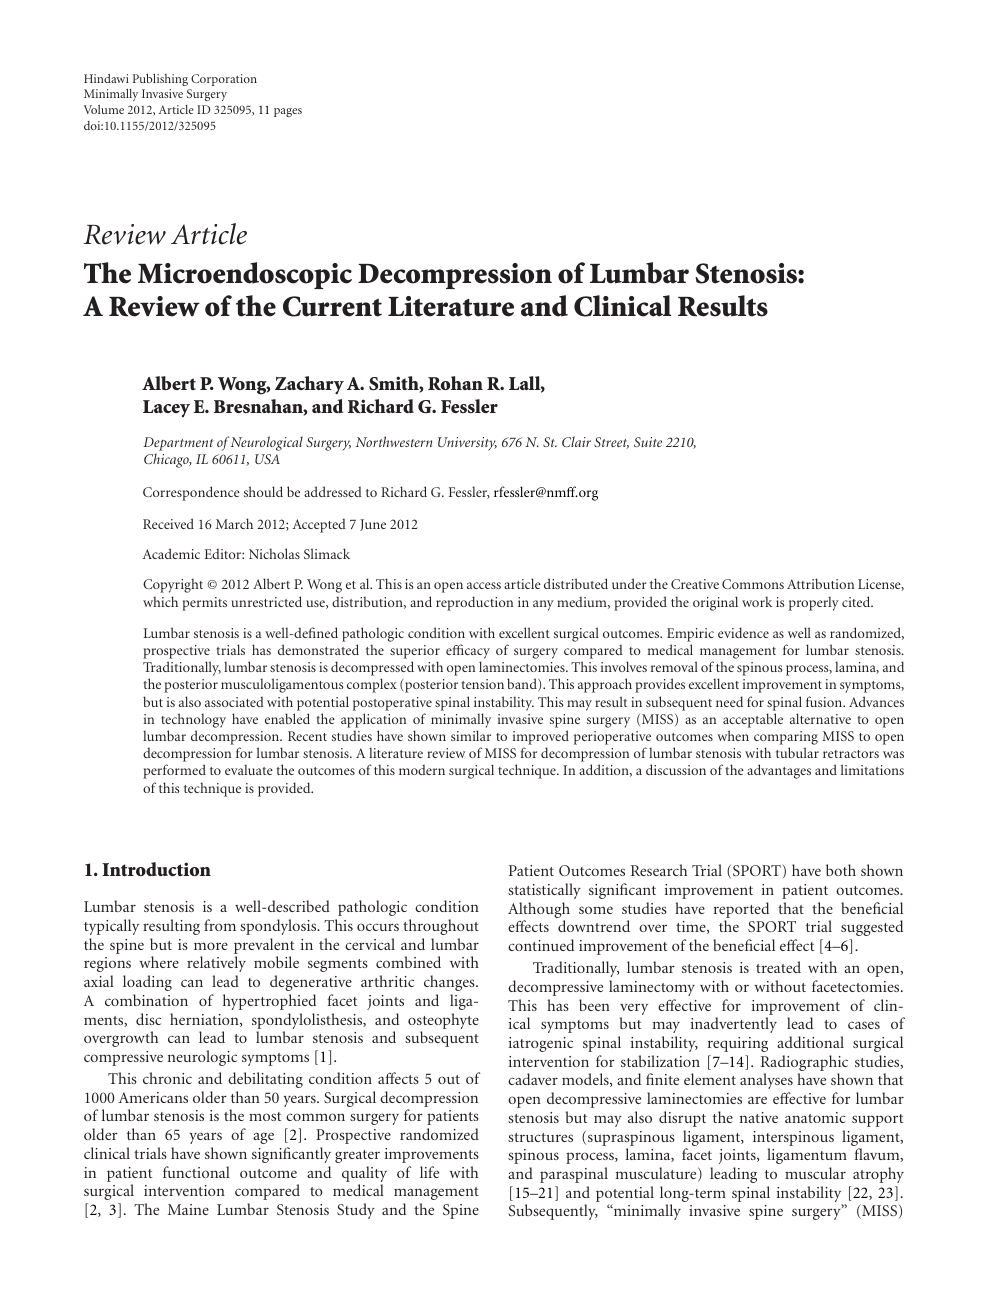 The Microendoscopic Decompression Of Lumbar Stenosis A Review Of The Current Literature And Clinical Results Topic Of Research Paper In Clinical Medicine Download Scholarly Article Pdf And Read For Free On